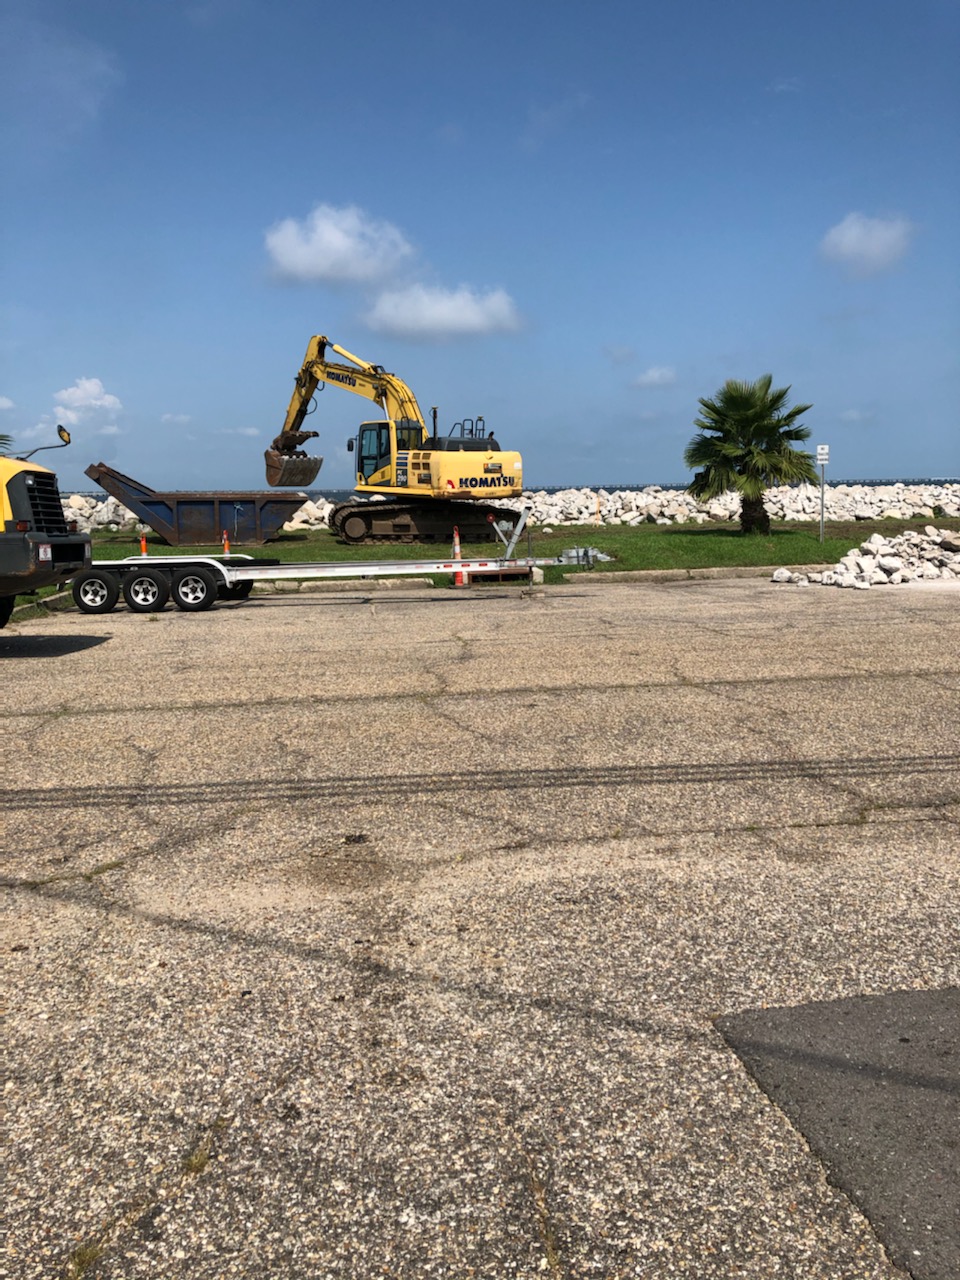 WORK SET TO RESUME ON BREAKWATER DRIVE PROJECT IN OCTOBER